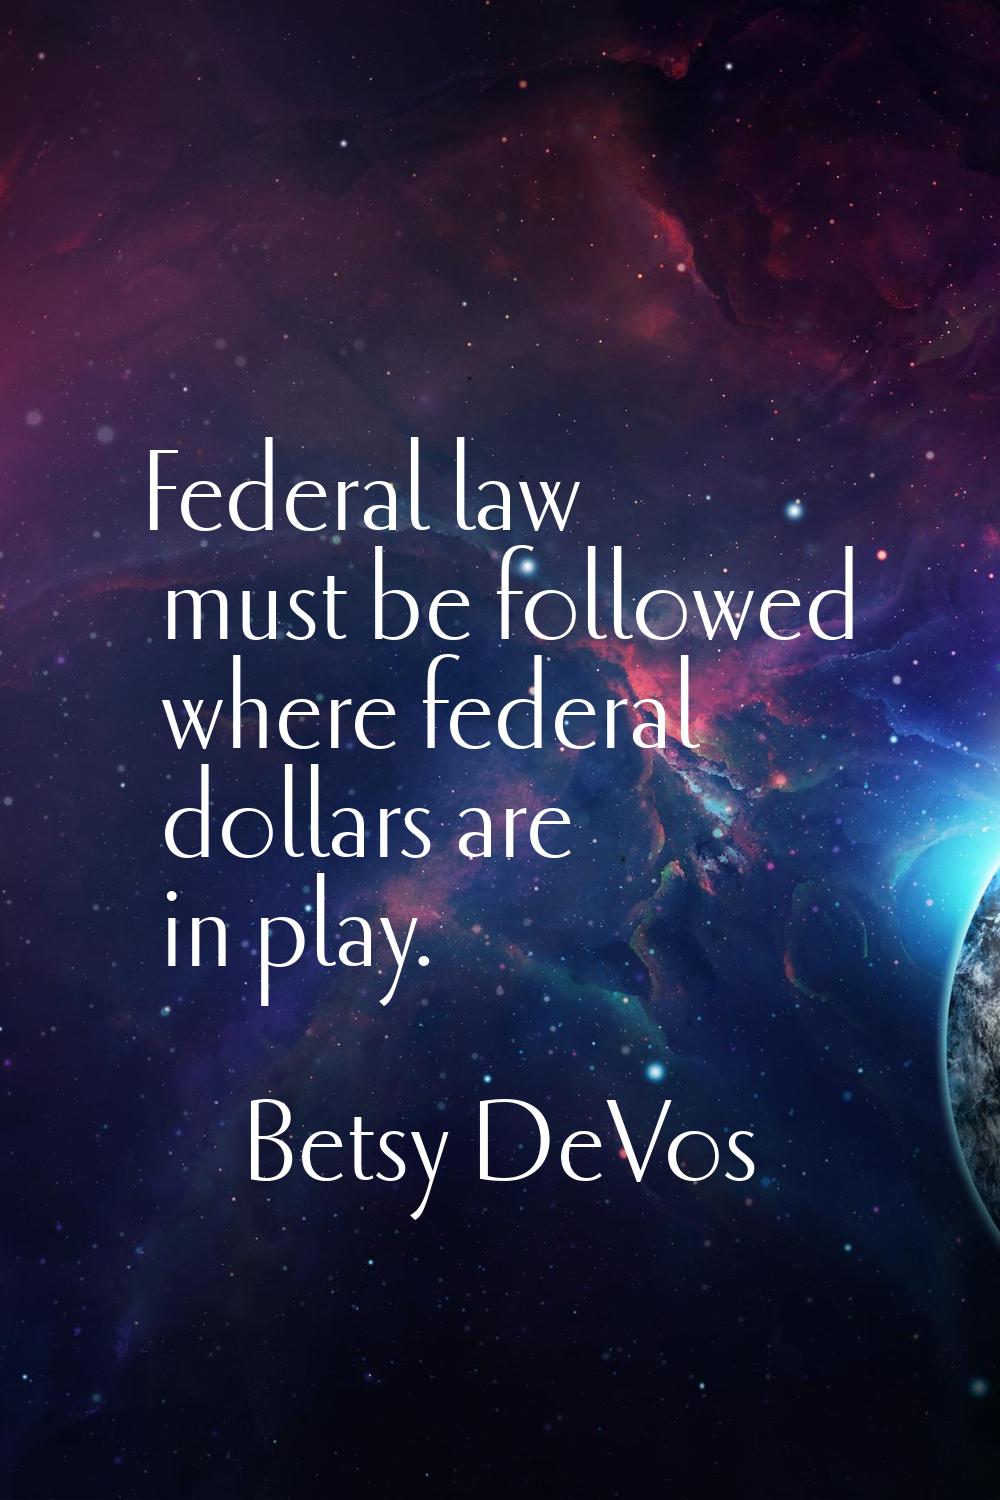 Federal law must be followed where federal dollars are in play.